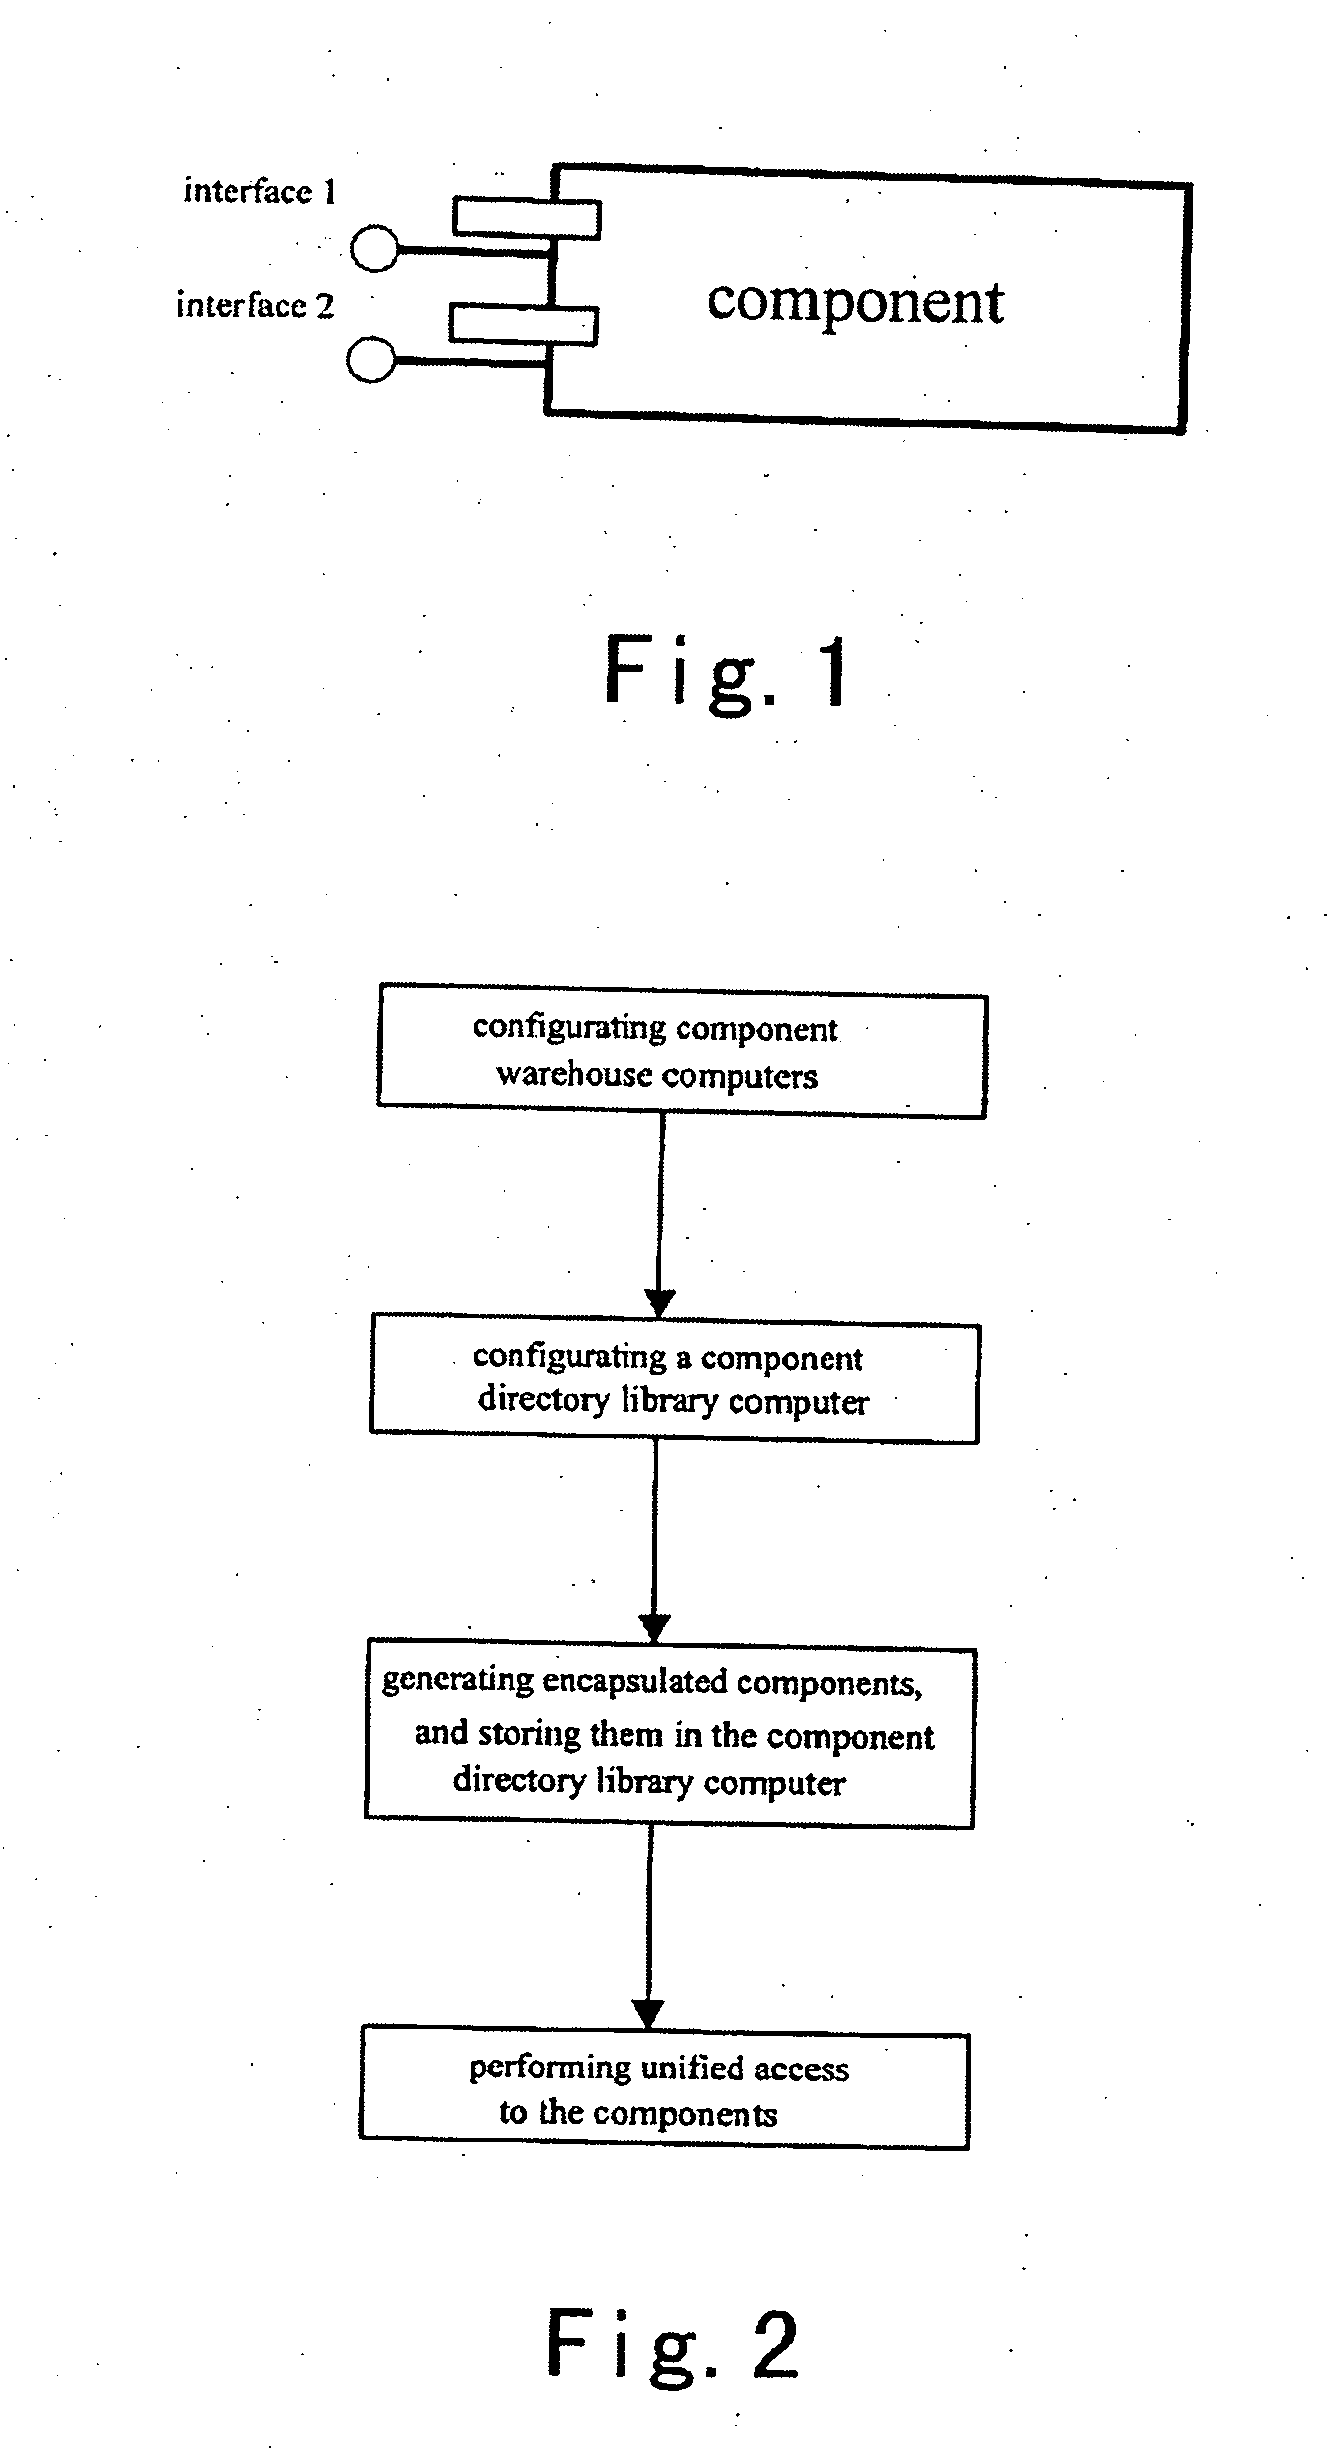 Encapsulation and unified access scheme for components